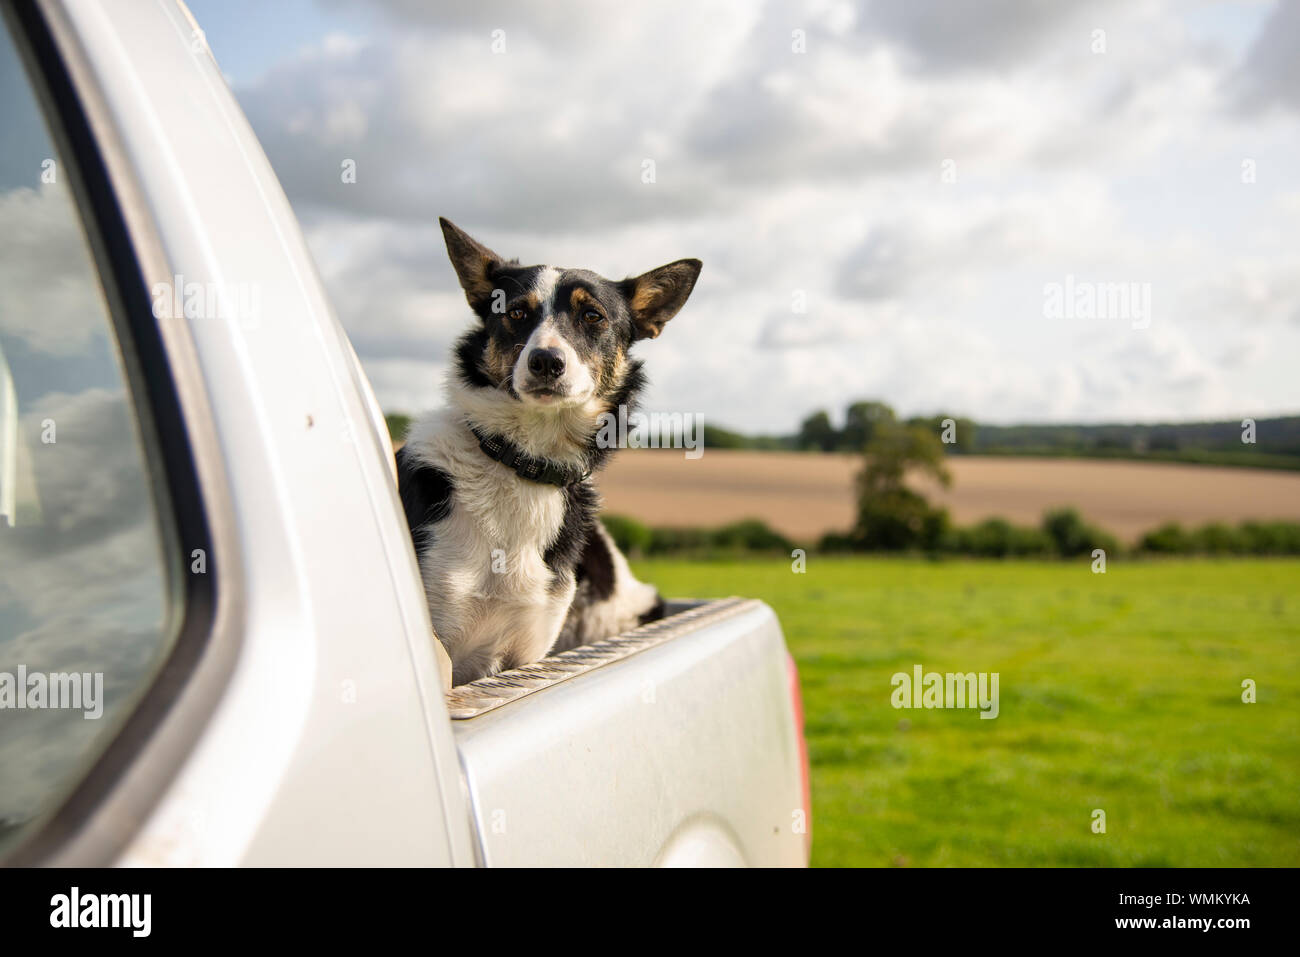 Two sheep dogs in a pick up truck in a field UK Stock Photo